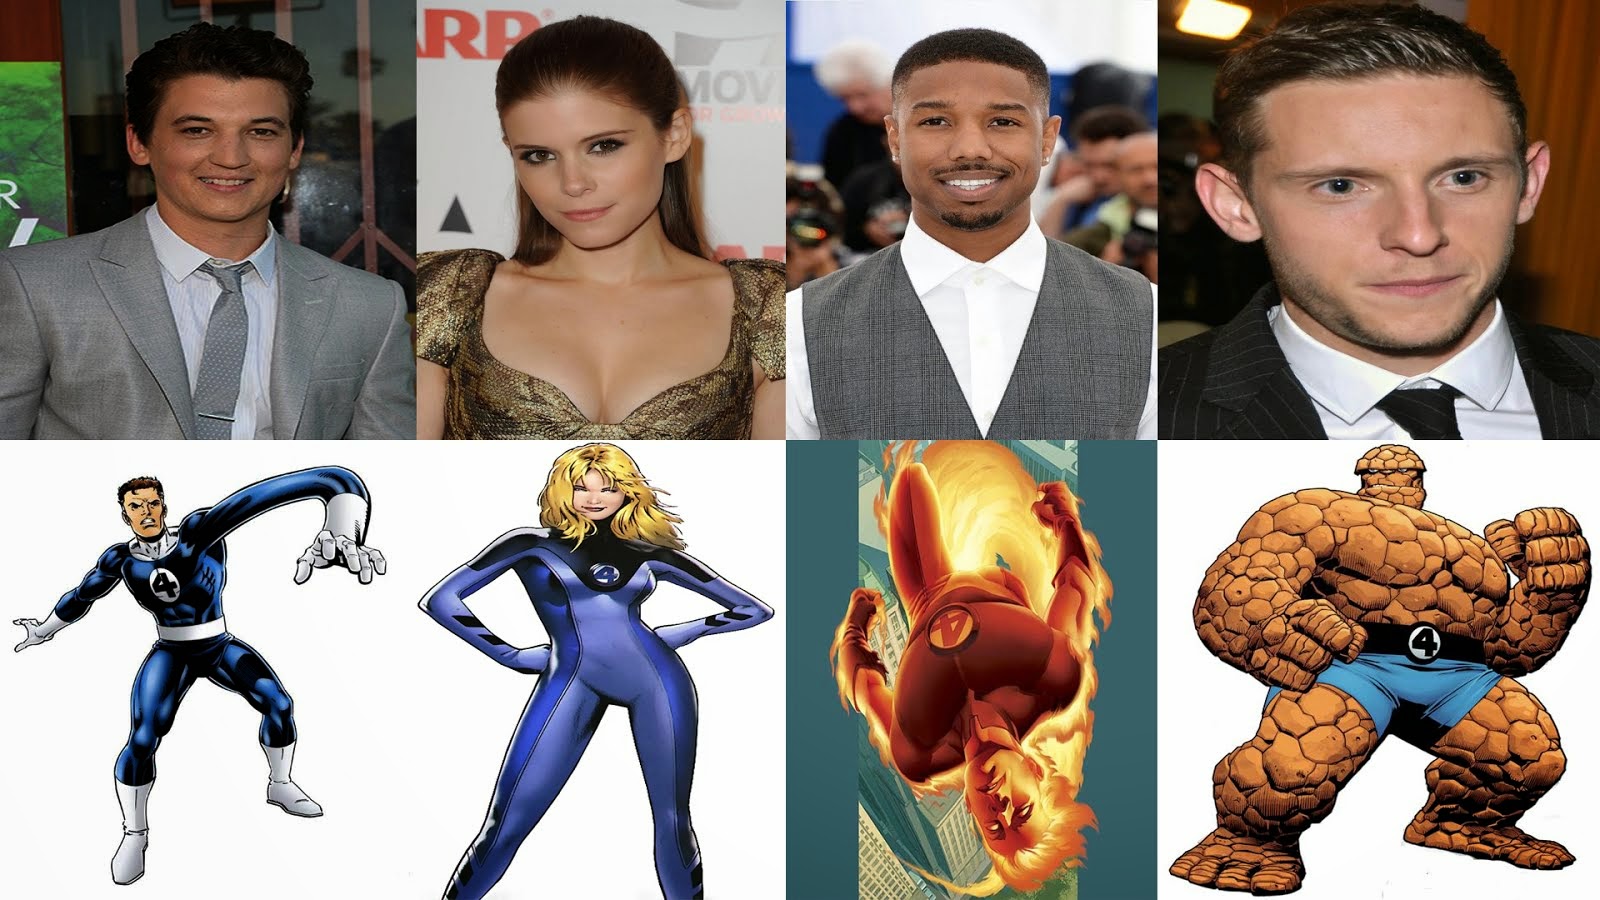 Fantastic Four Reboot Coming August 2015.